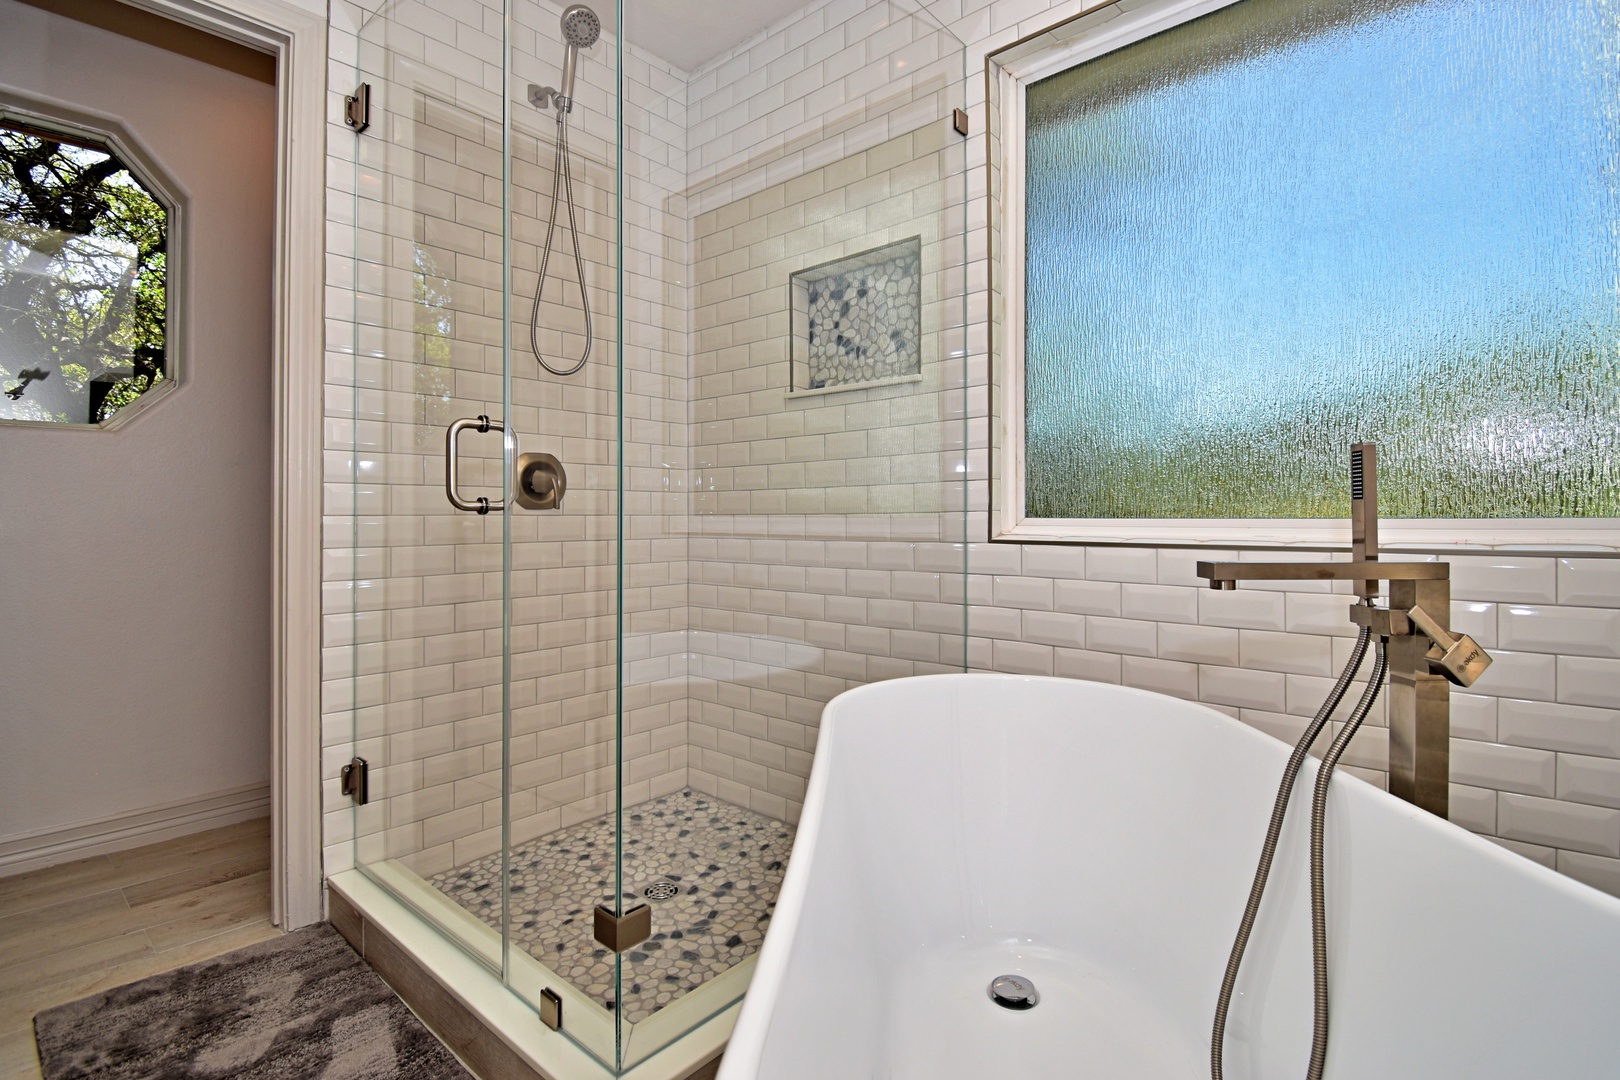 The king ensuite features a dual vanity, glass shower, & luxurious soaking tub